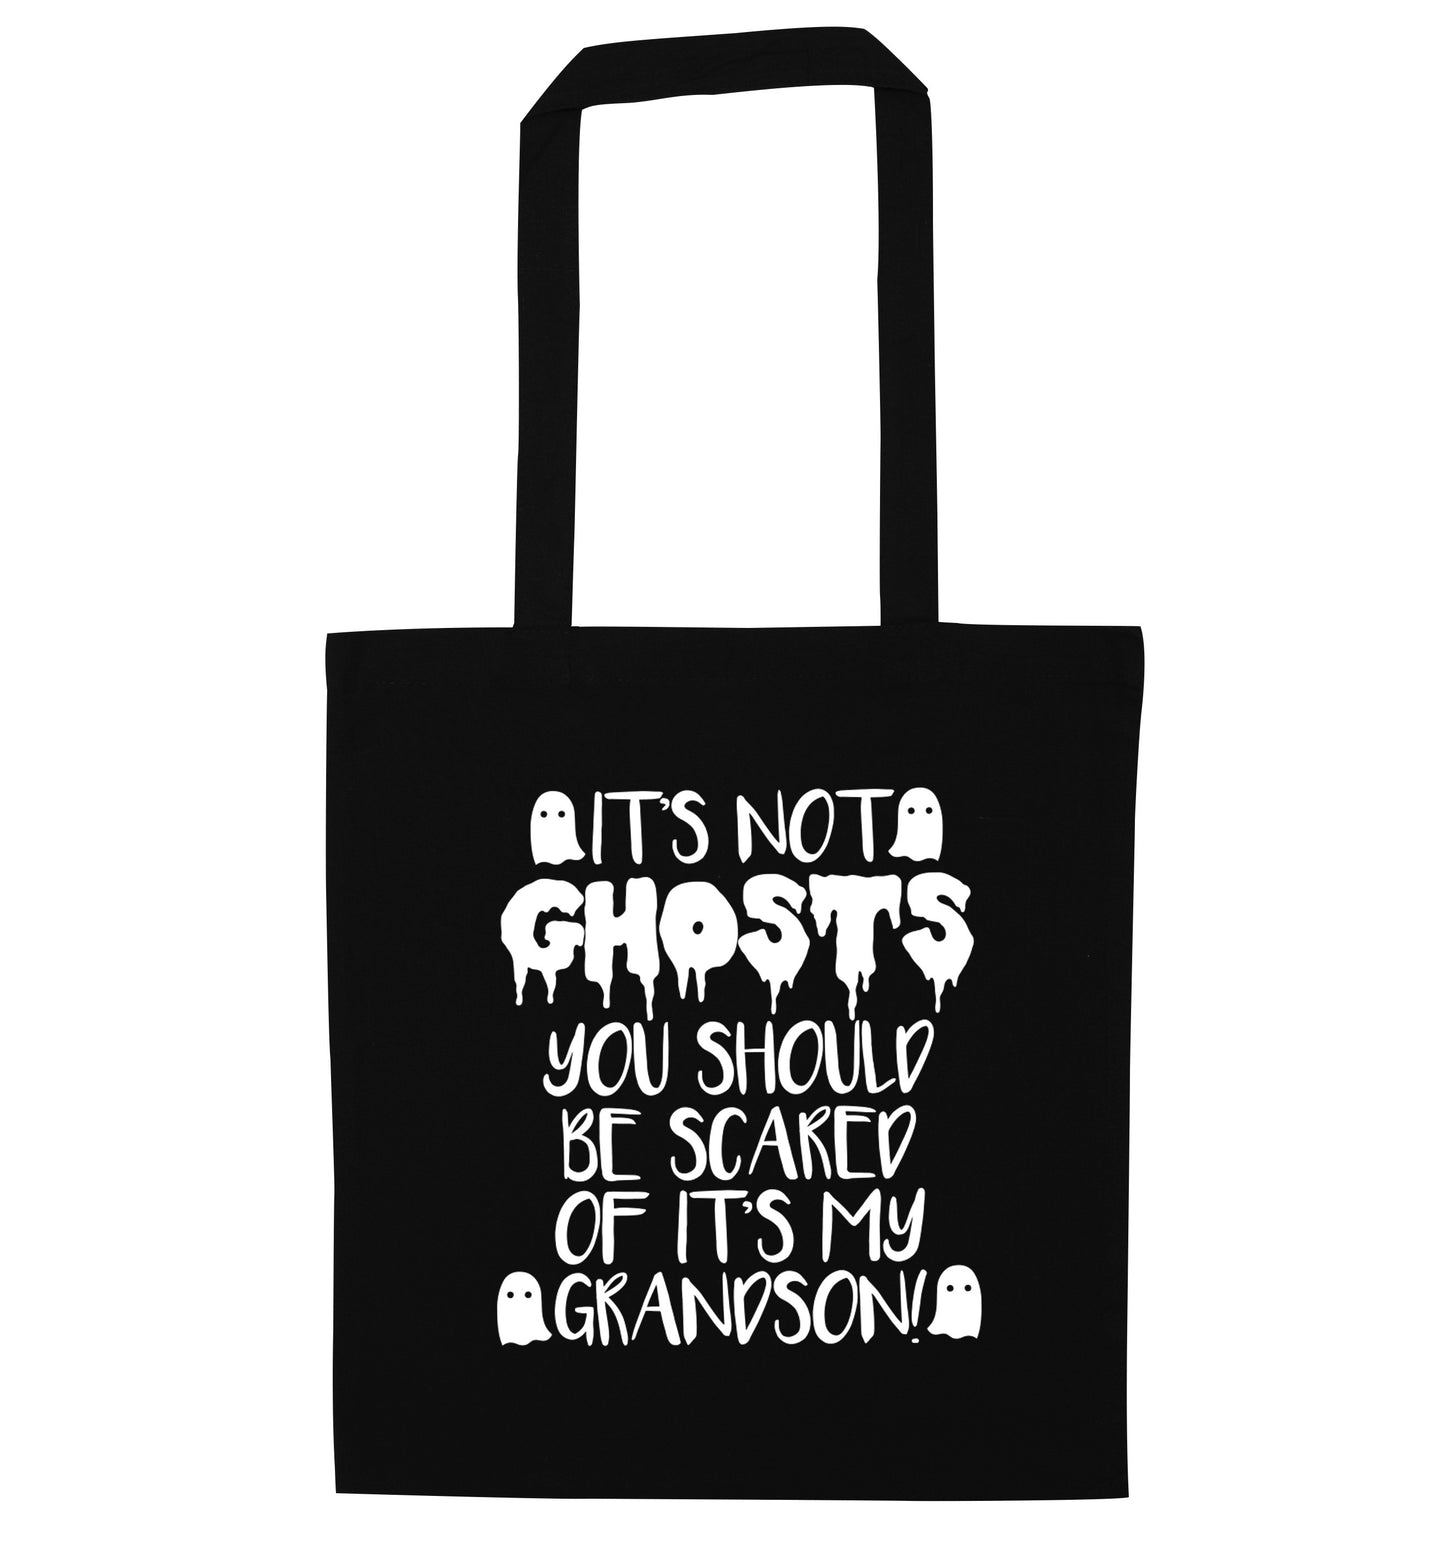 It's not ghosts you should be scared of it's my grandson! black tote bag